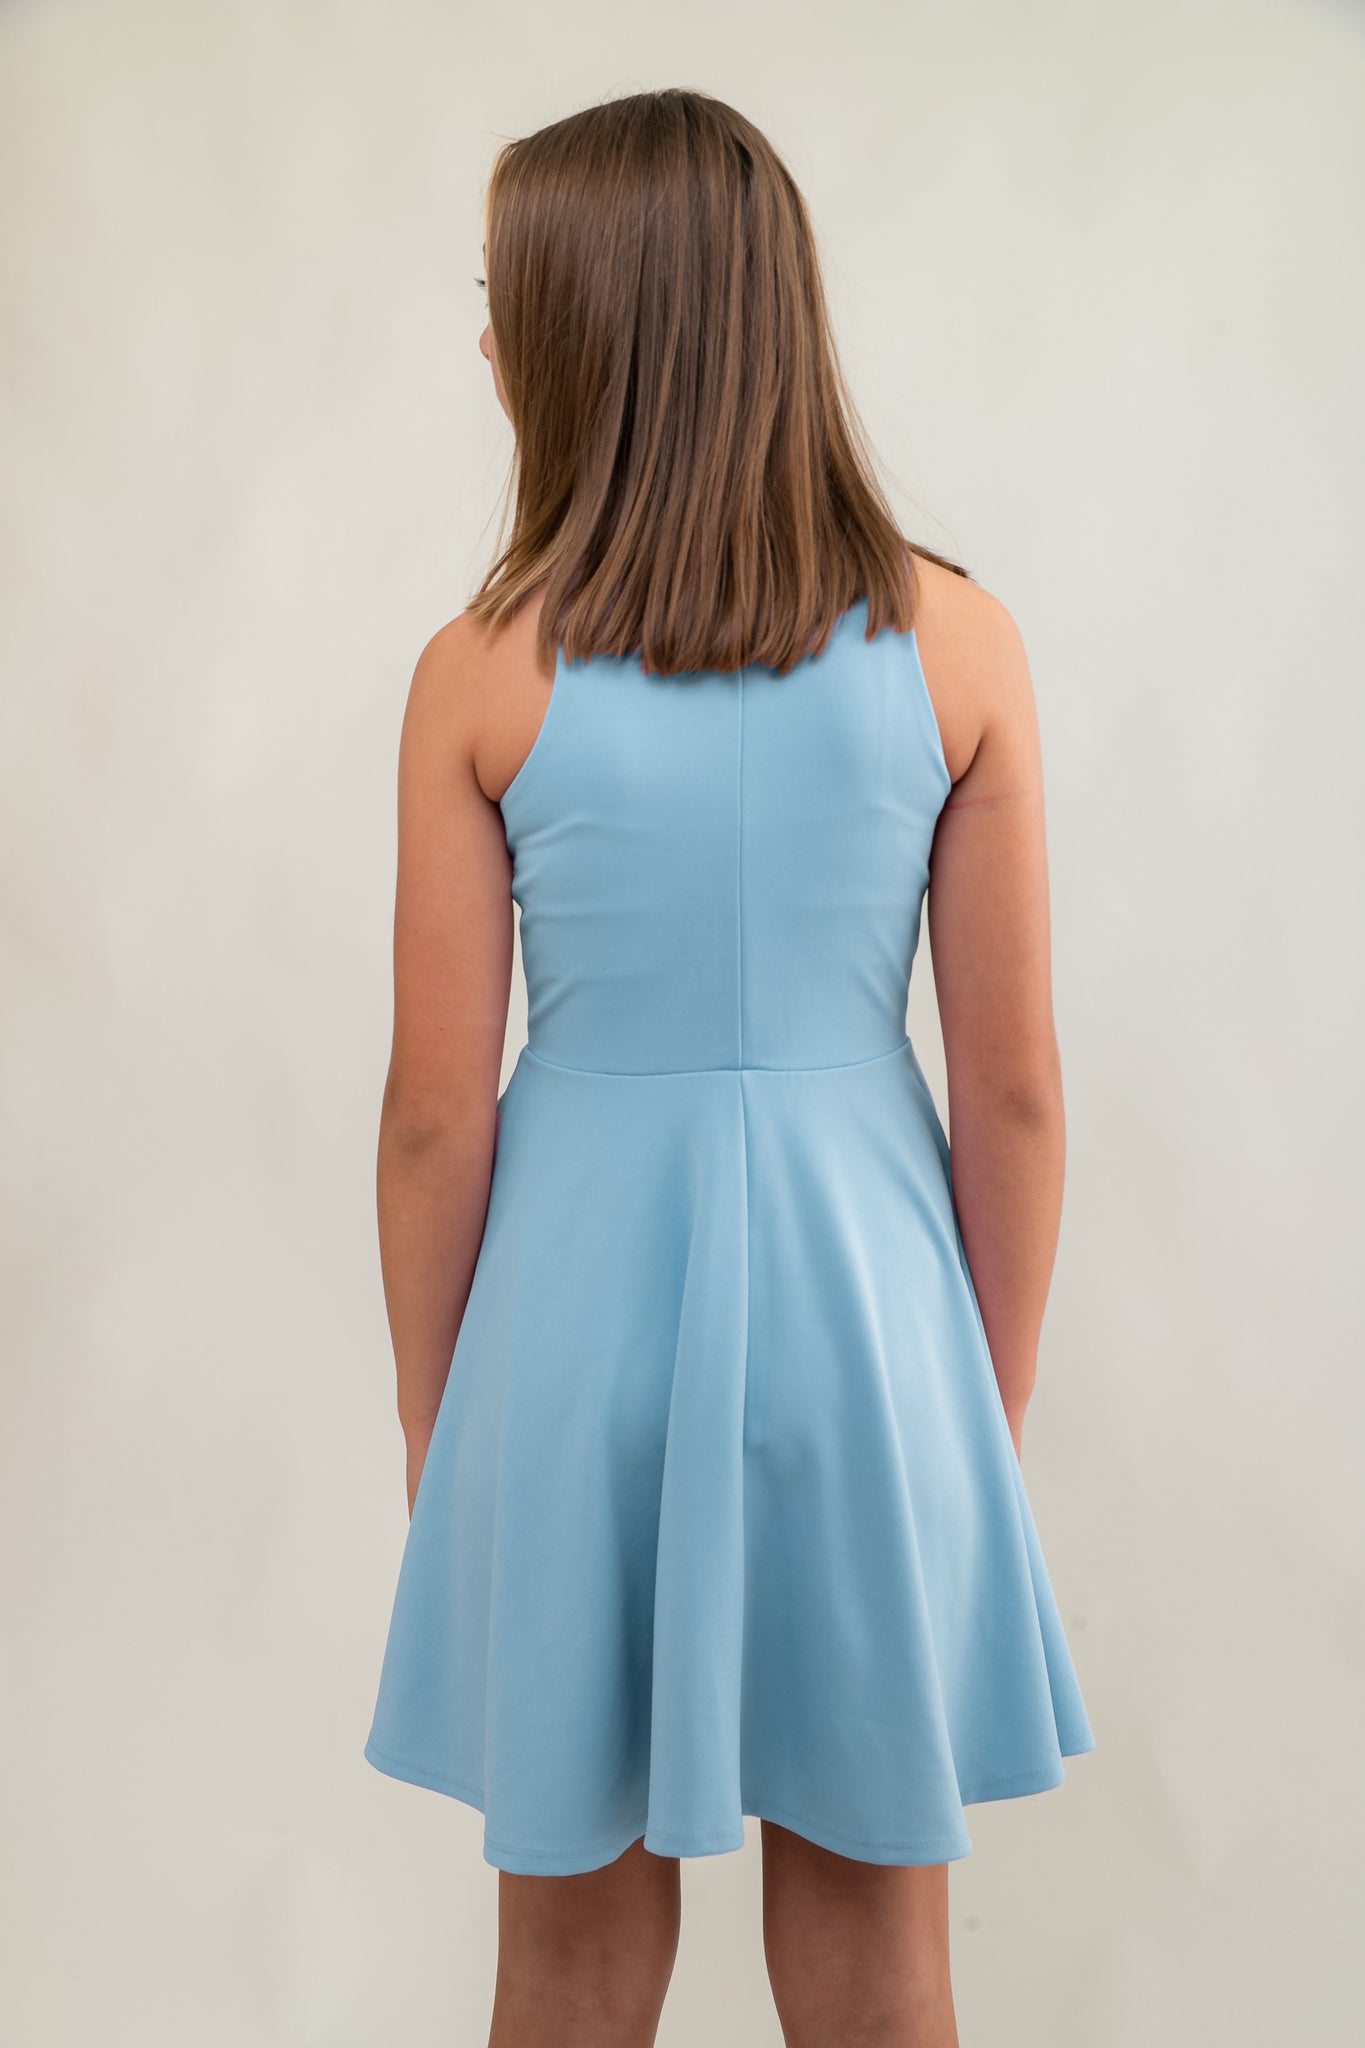 The tank style sleeve textured fit and flare dress is shown in light blue with high neck line, racerback detailing and dart bodice for a chic and sophisticated look. This dress can be worn to a more conservative special occasion event like cotillion, graduation, or religious service like a bat mitzvah service or church ceremony.